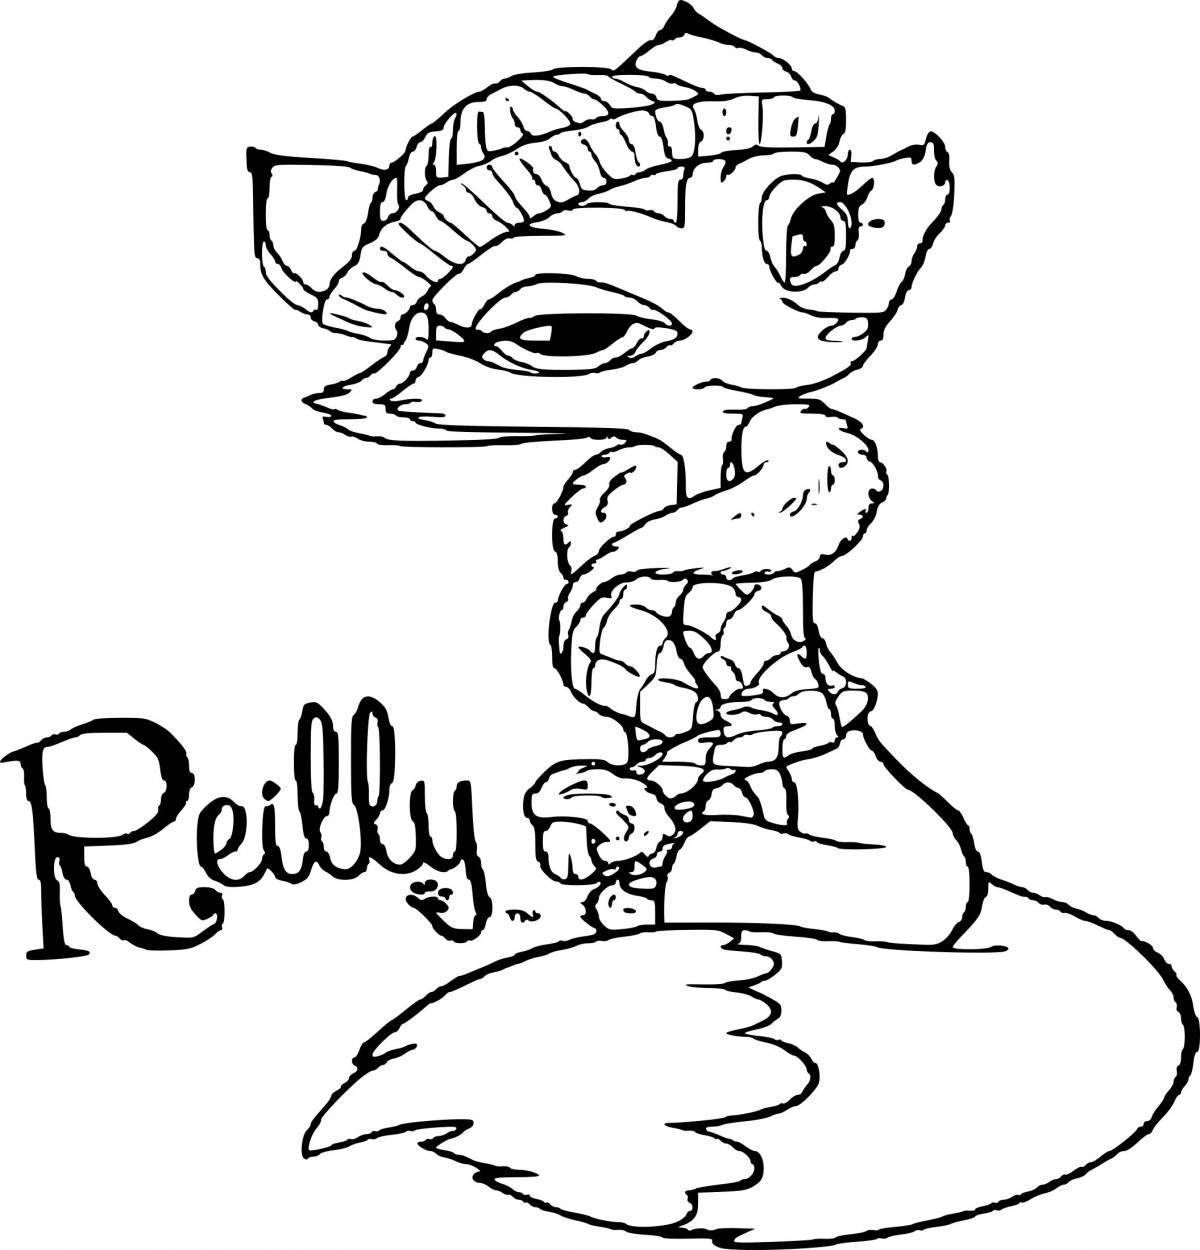 Brilliant coloring page my talking angela